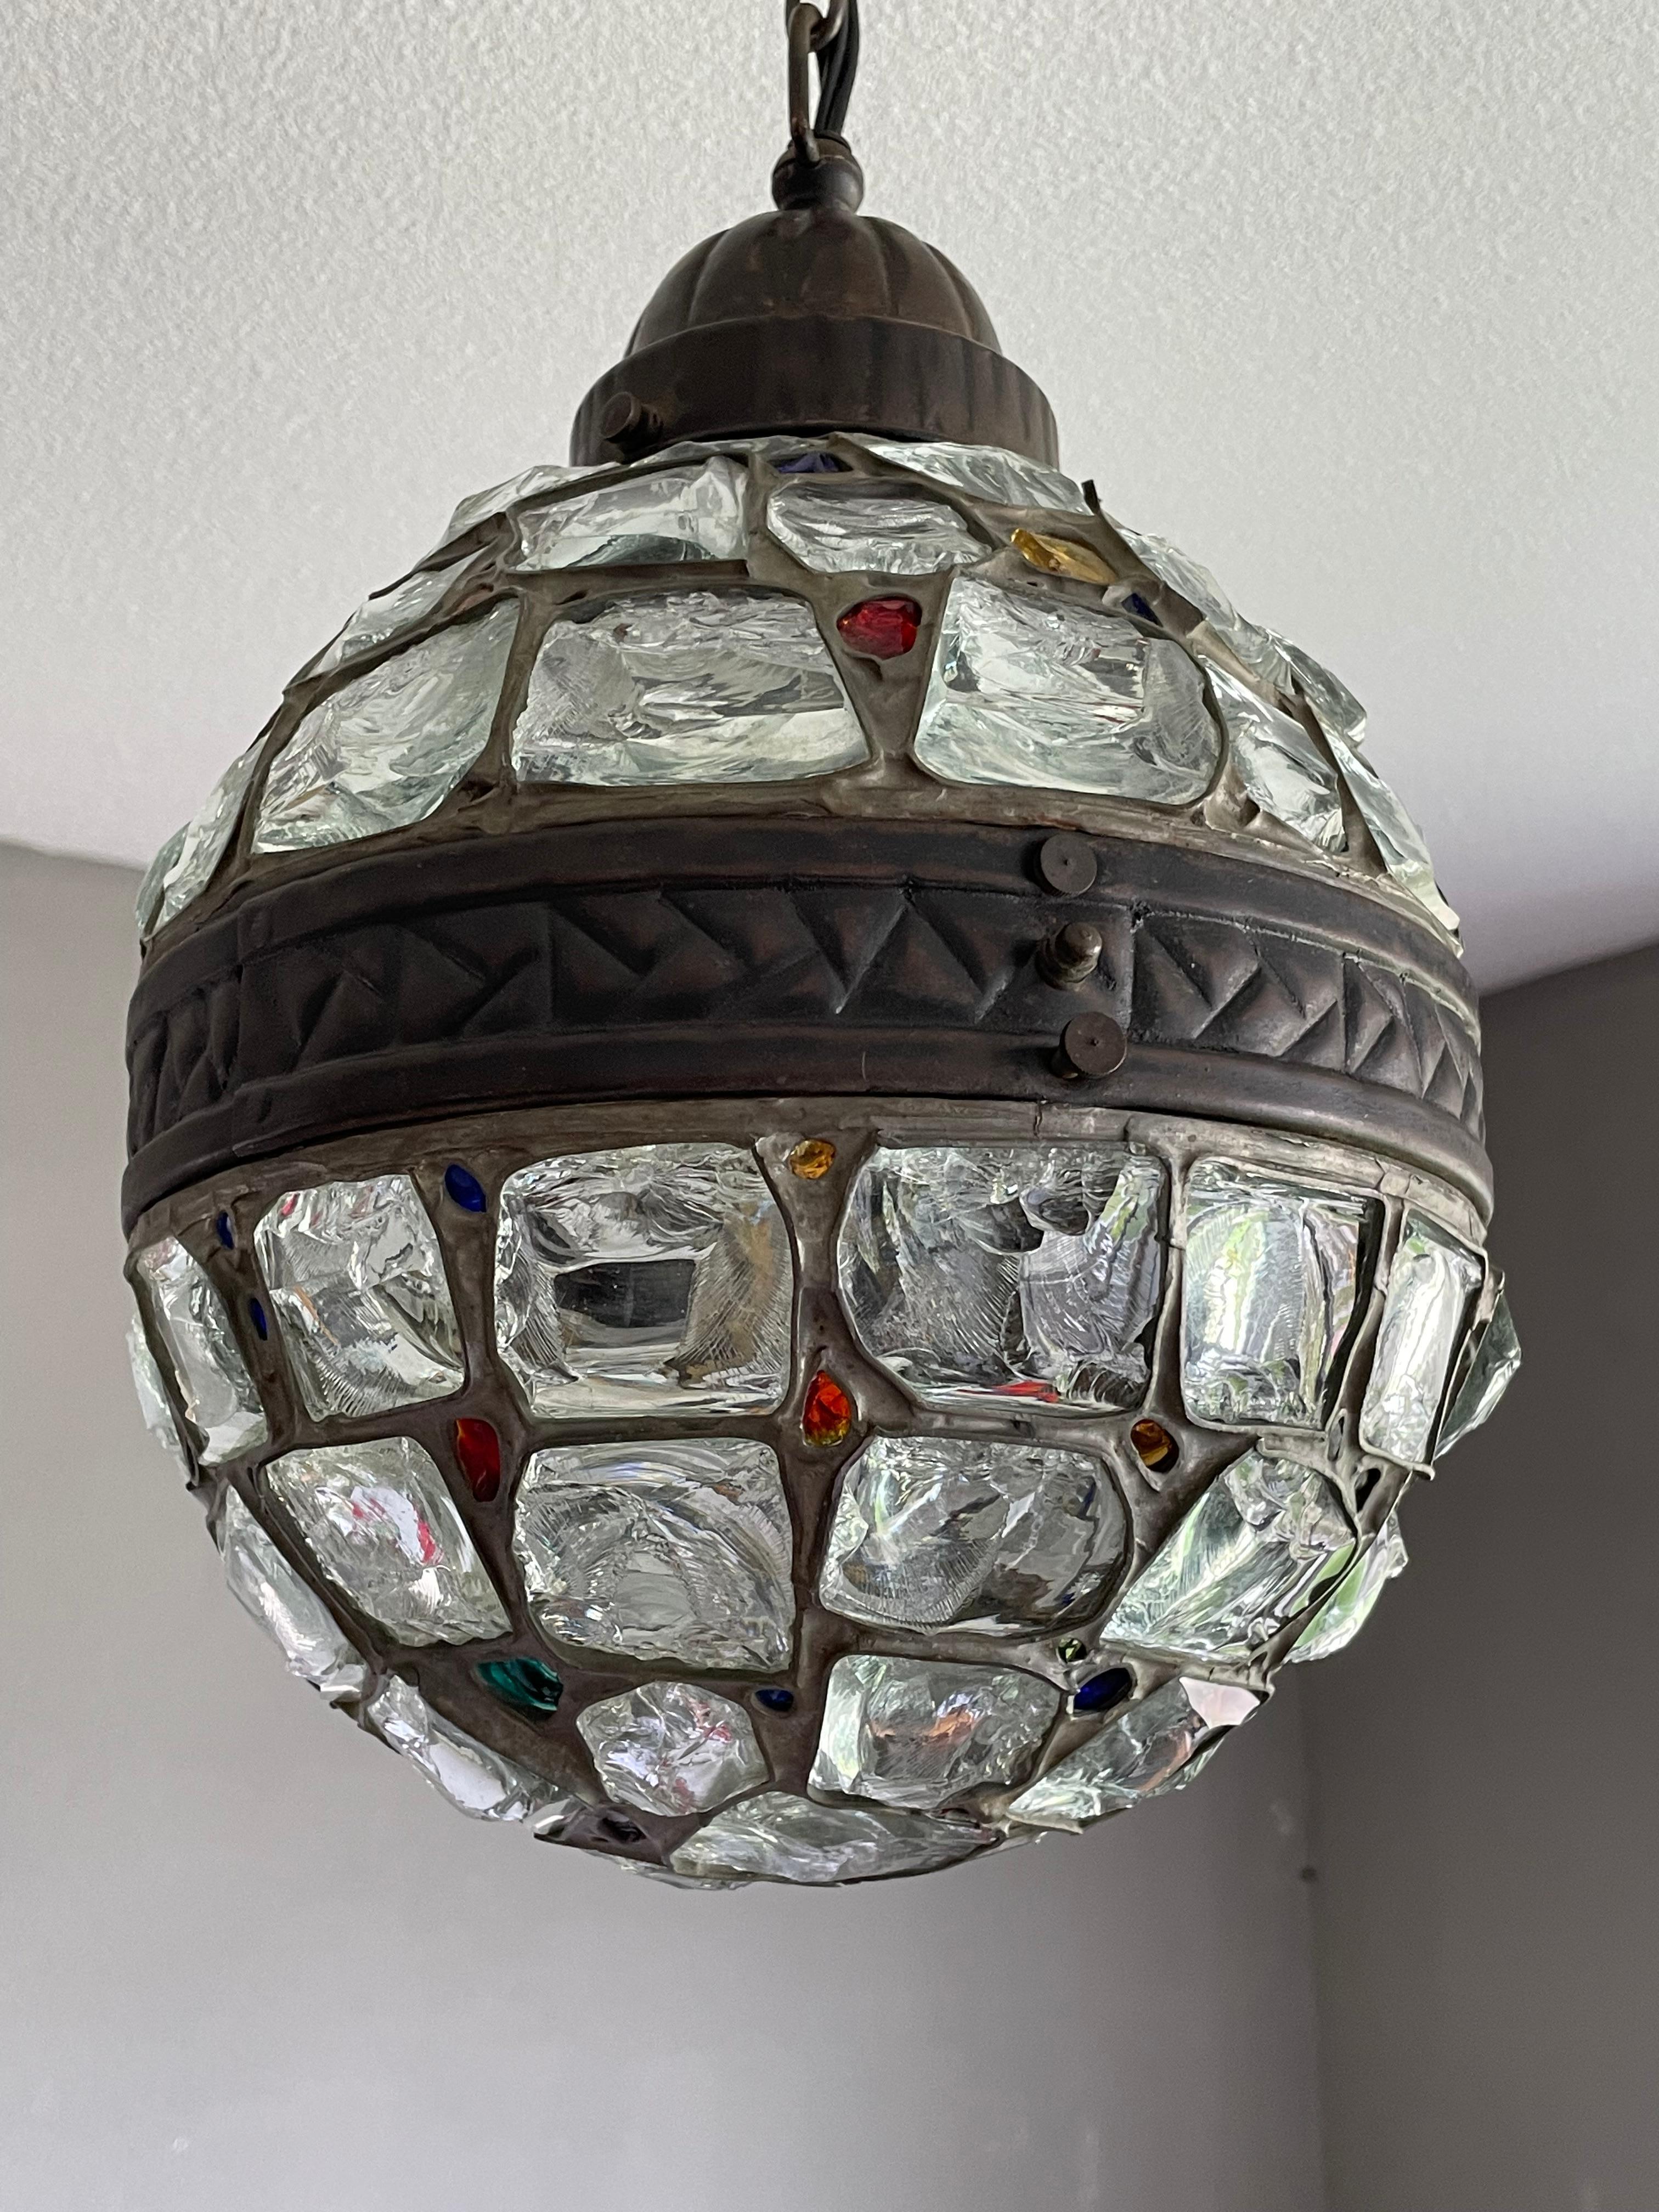 Very cool, metal and inlaid 'chunky glass' light fixture from the early 1900s.

This great looking and artistic workmanship pendant from the earliest years of the 20th century is another one of our recent great finds. With early 20th century